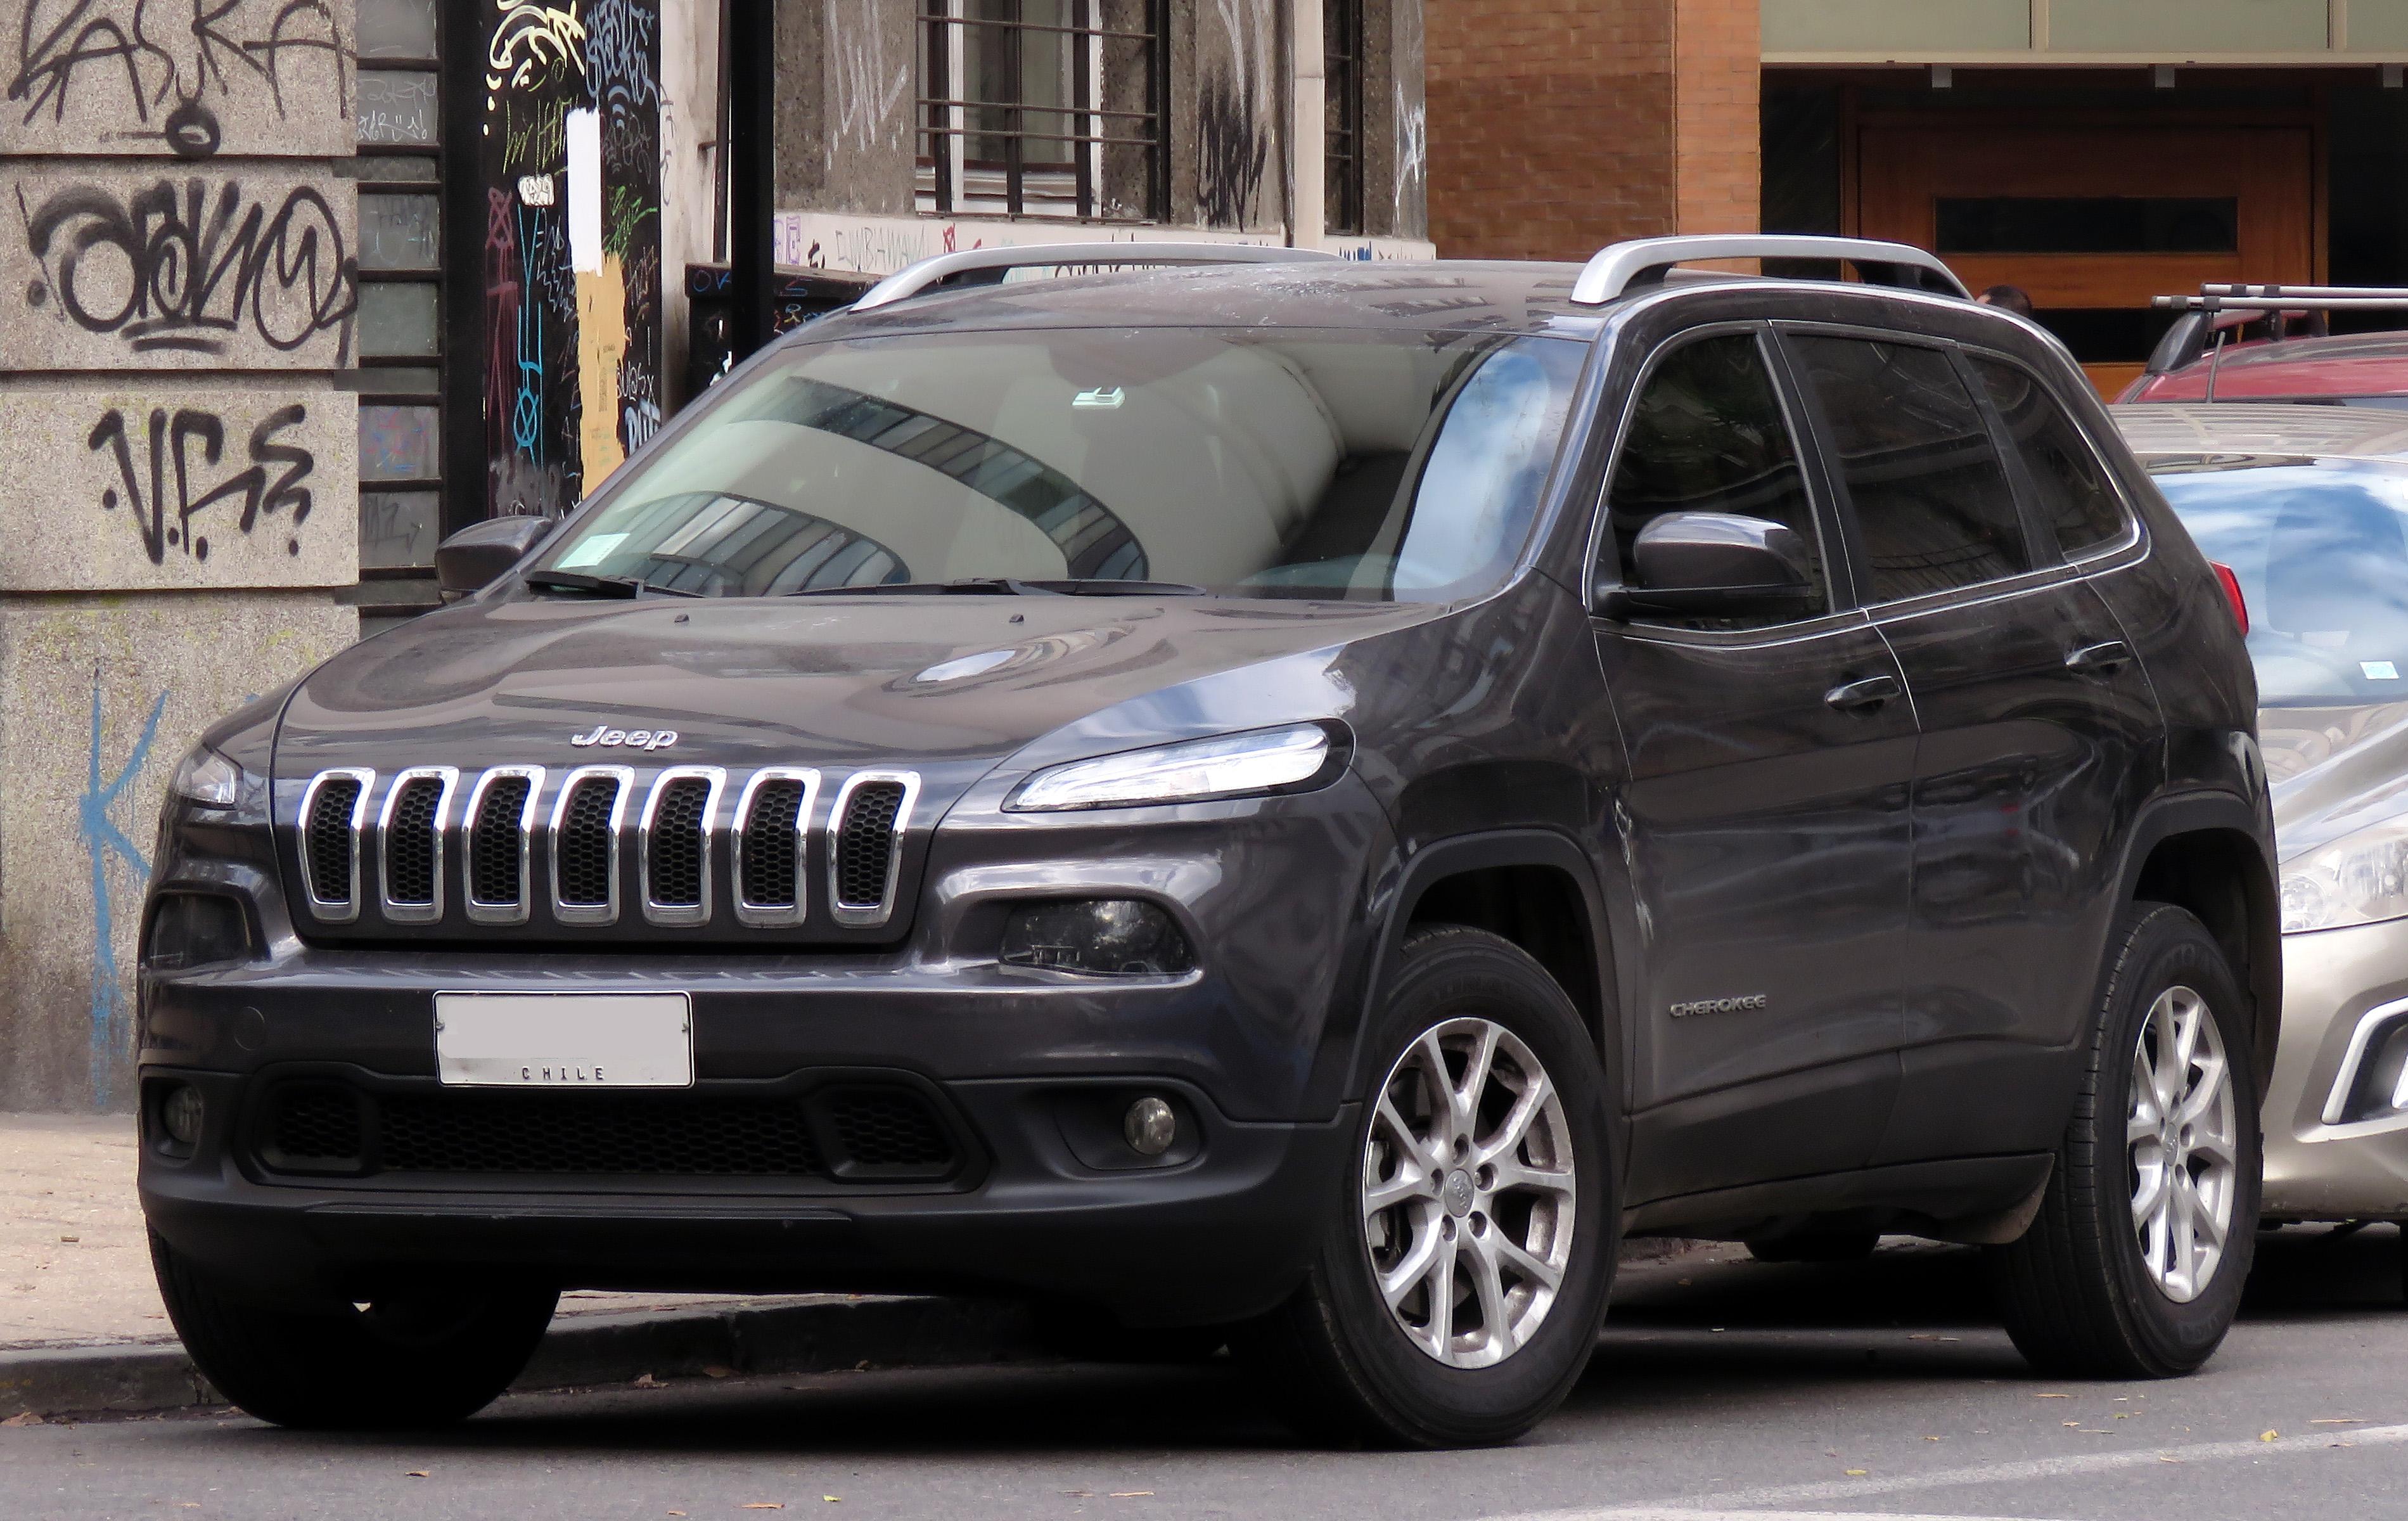 Body and Frame Integrity: Assessing the Structural Longevity of a Jeep Cherokee